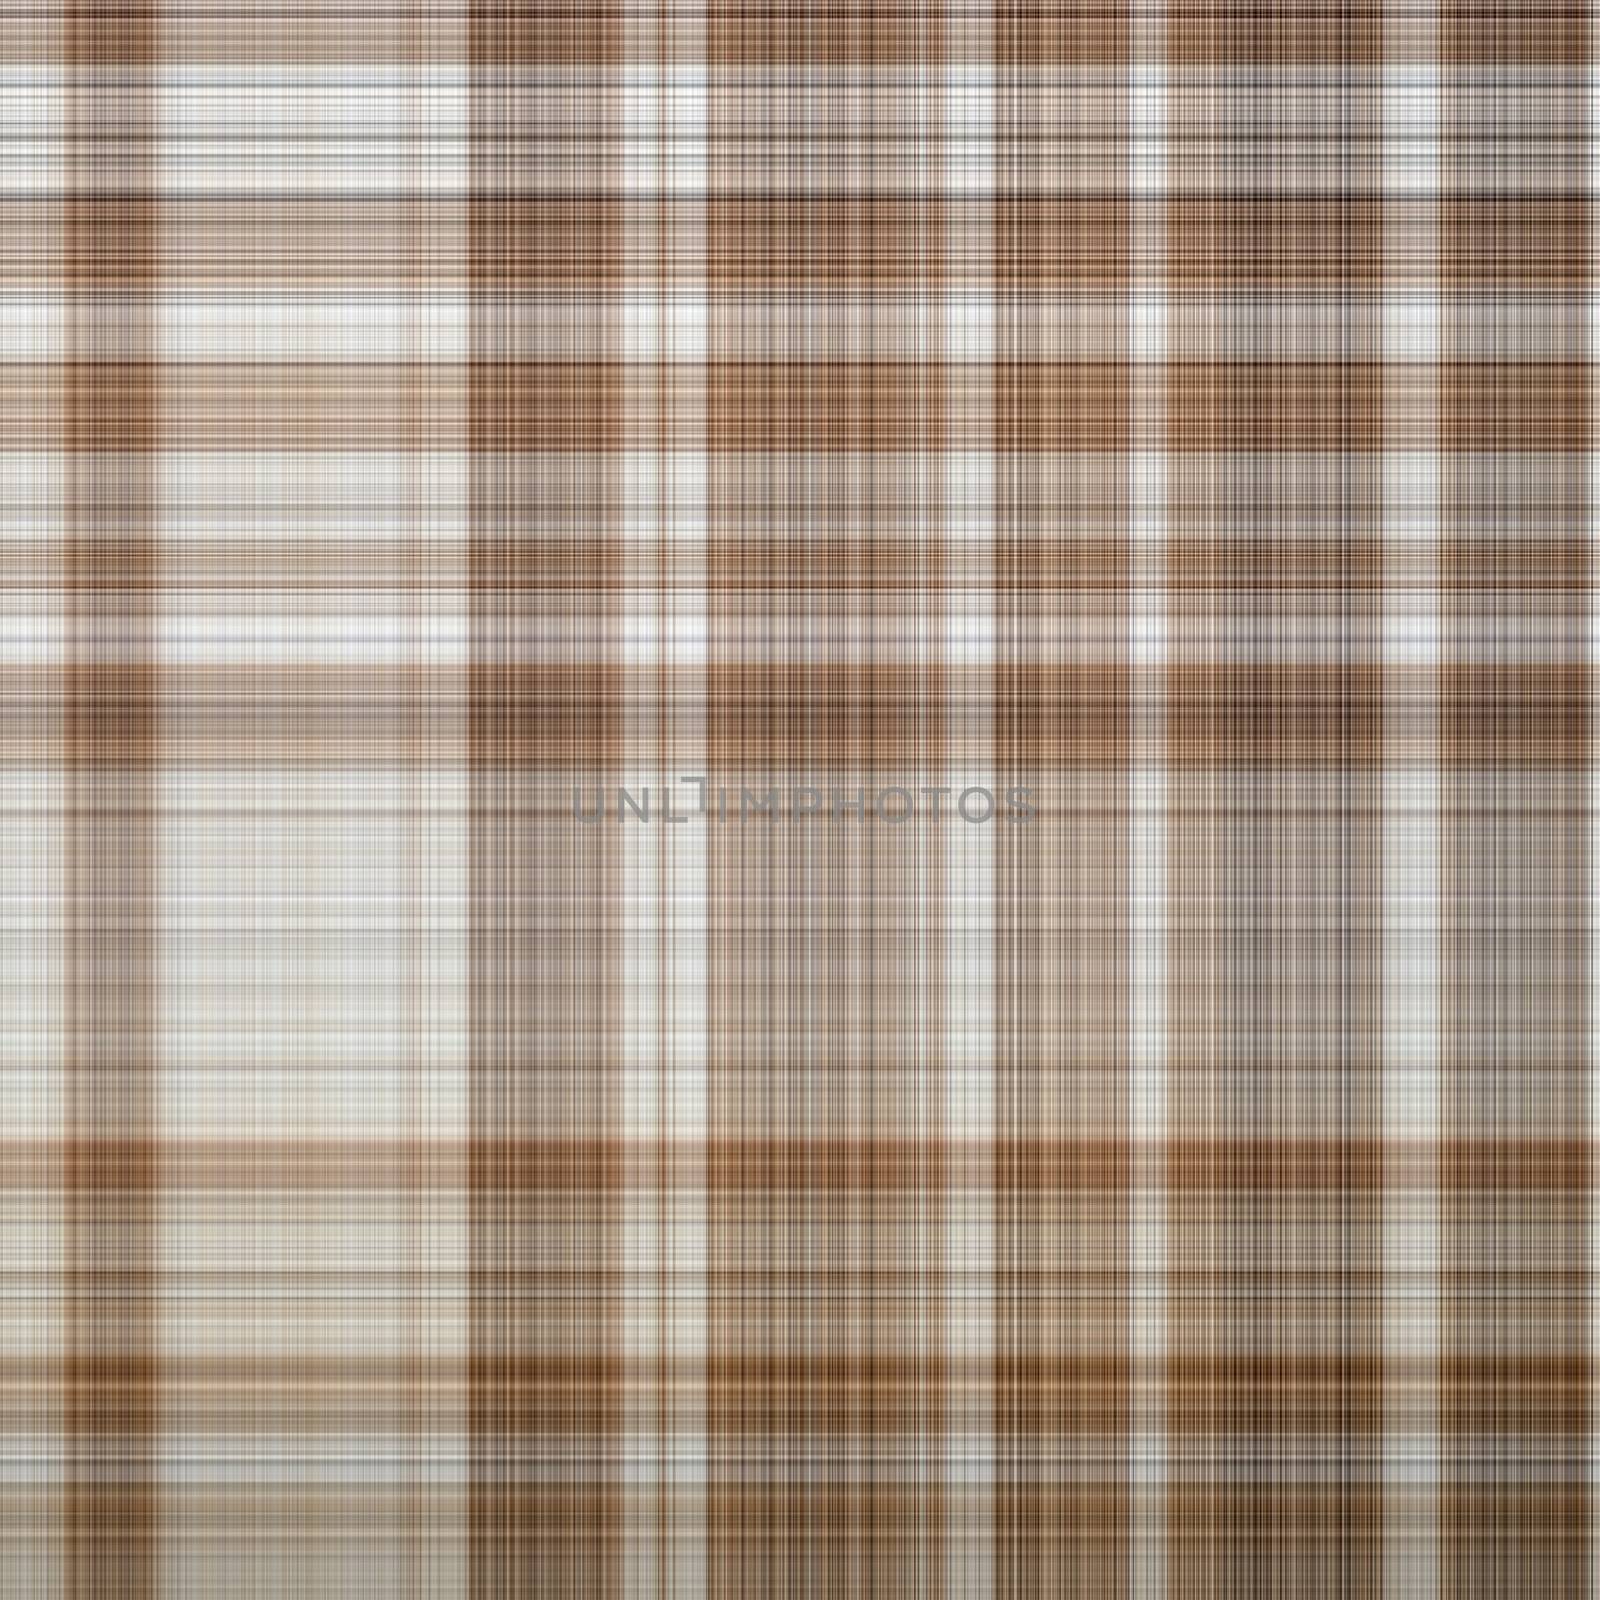 Abstract brown background texture, filler image, illustration